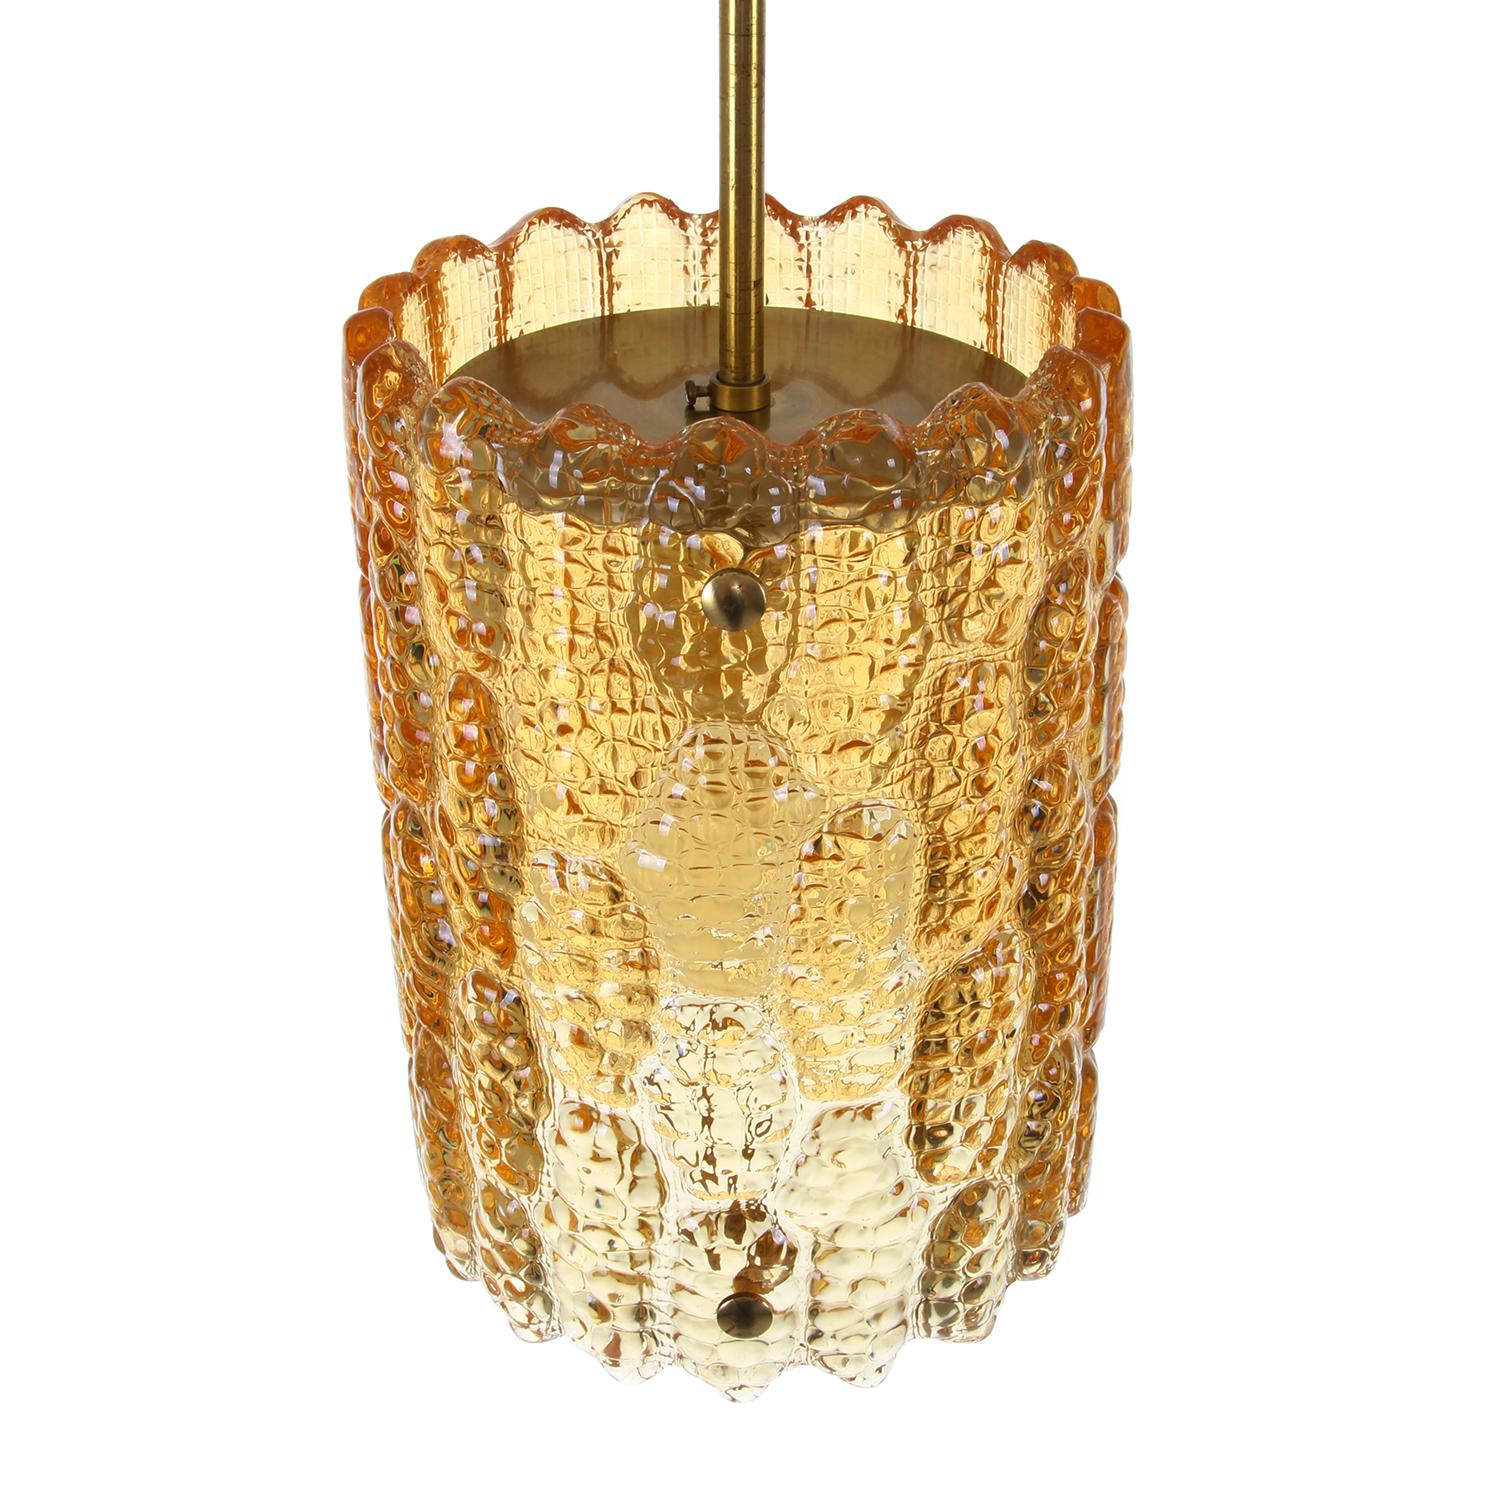 Orrefors Gefion Amber Crystal & Brass Pendant by Fagerlund, Lyfa/Orrefors, 1960s In Good Condition For Sale In Brondby, Copenhagen